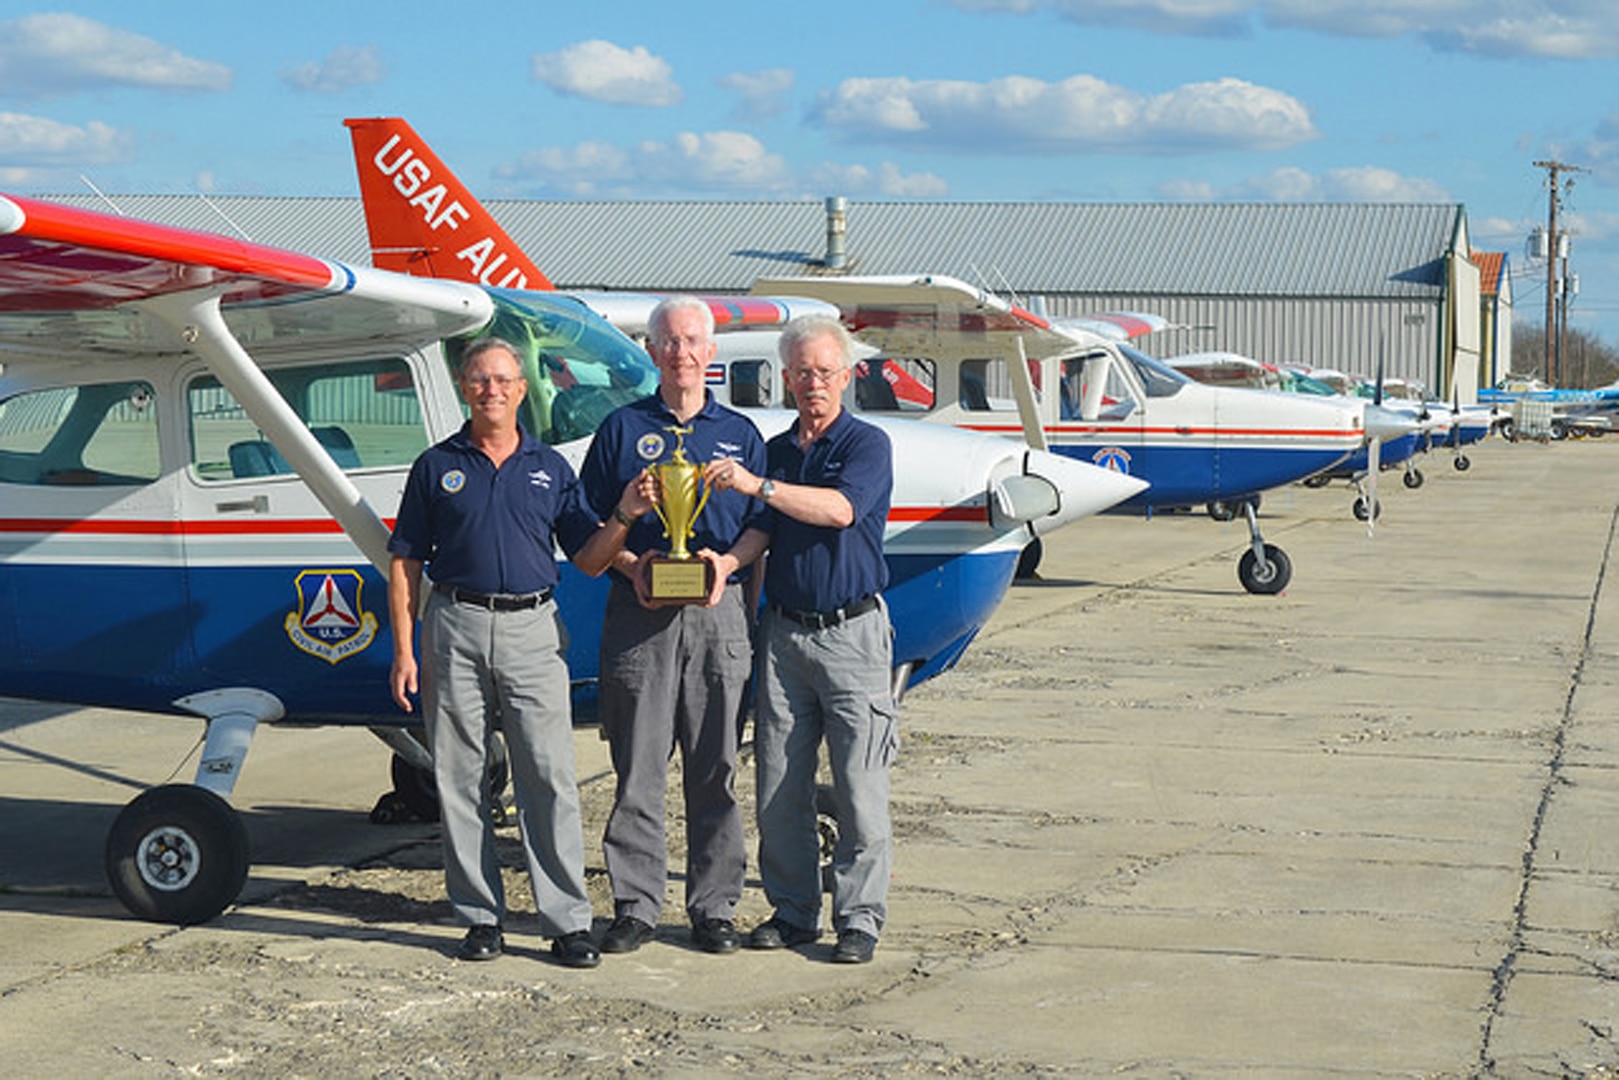 From left: Mike Duc, Roger Corbin and Jan Wagner display the first-place trophy they earned at the Civil Air Patrol Texas Wing Flight Competition Feb. 28 in San Marcos.